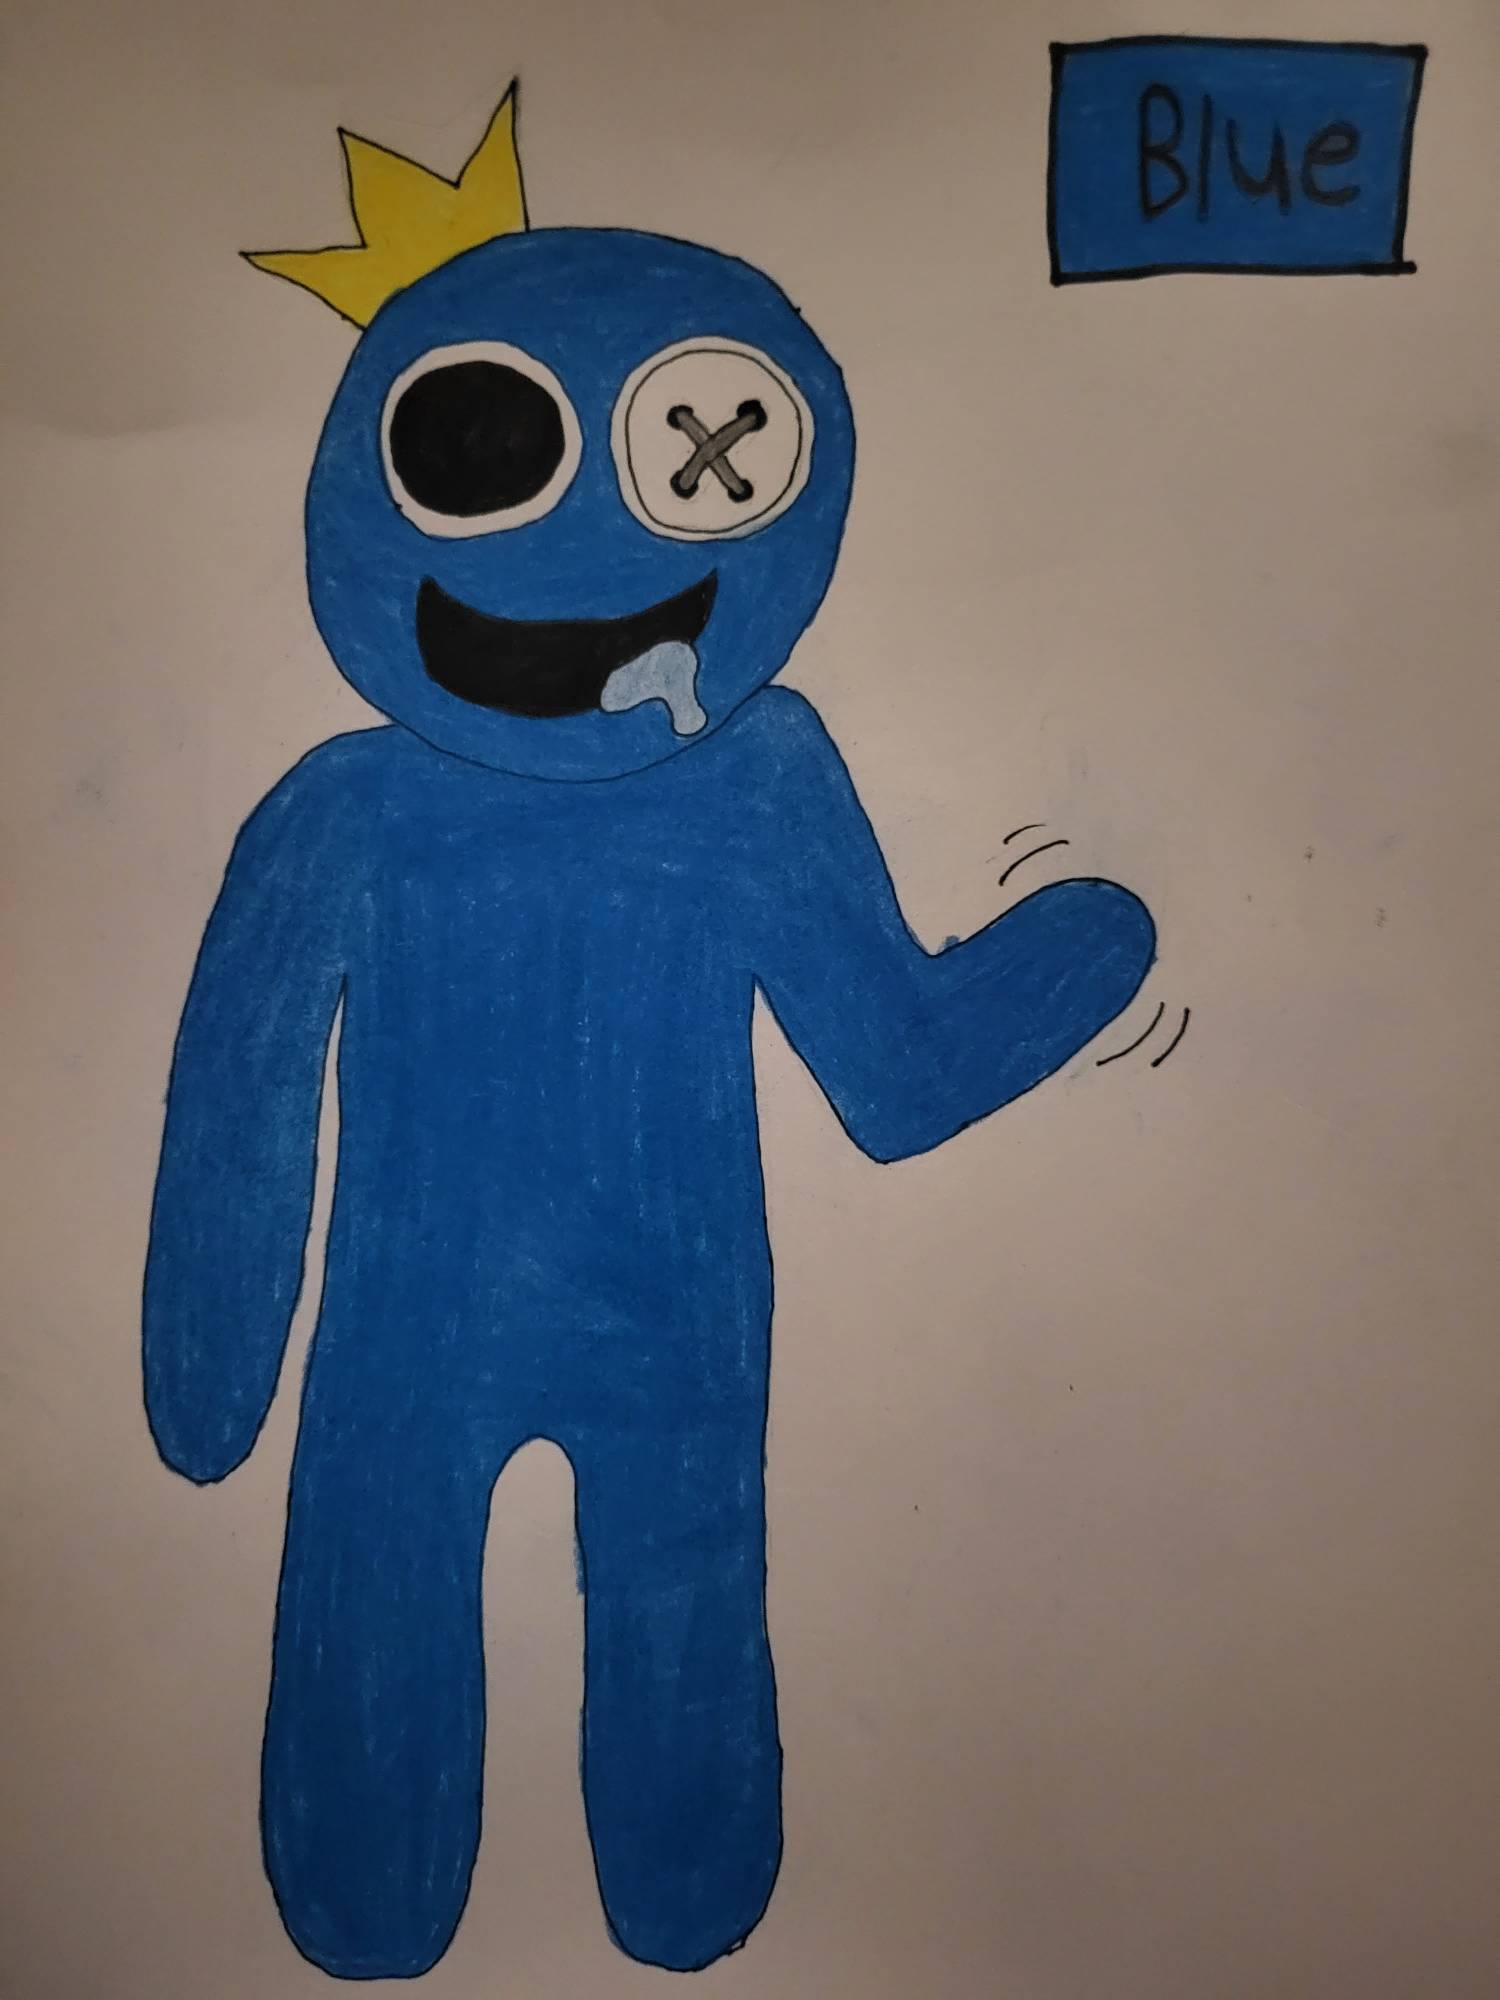 My drawing of the Blue Rainbow Friend